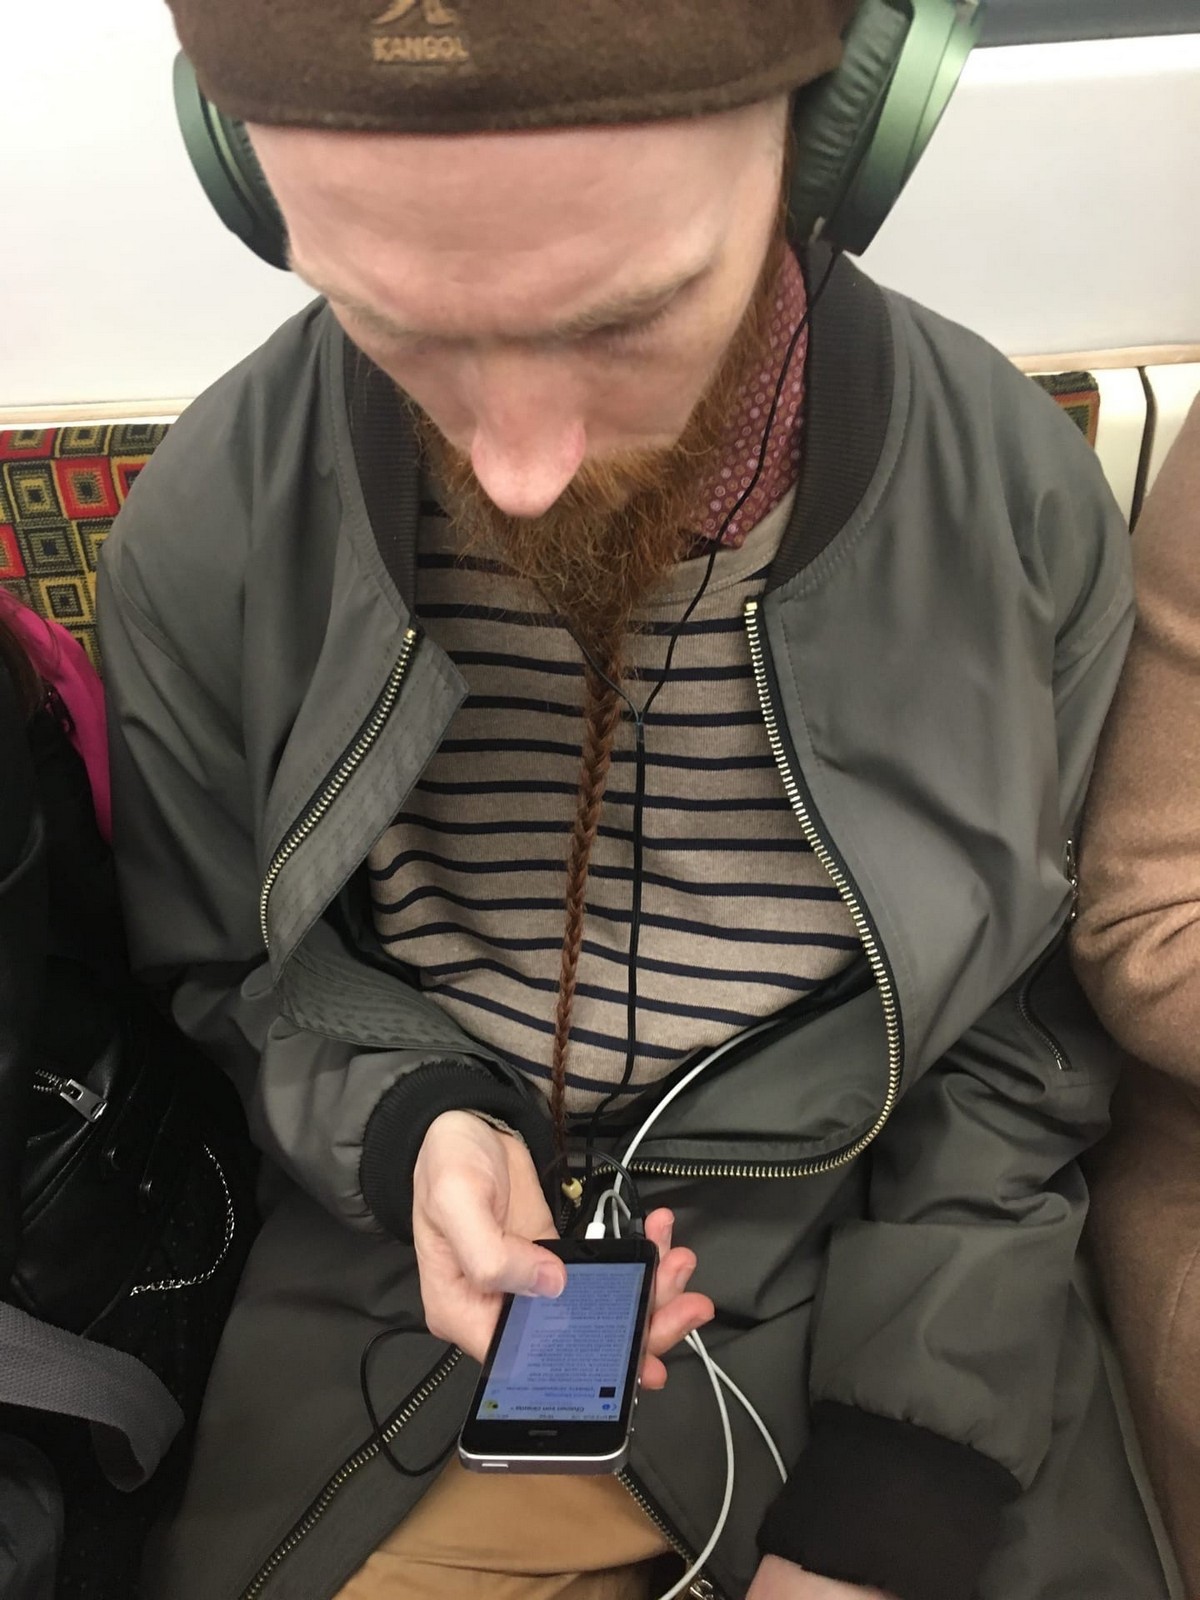 Strange People In The Subway, part 17